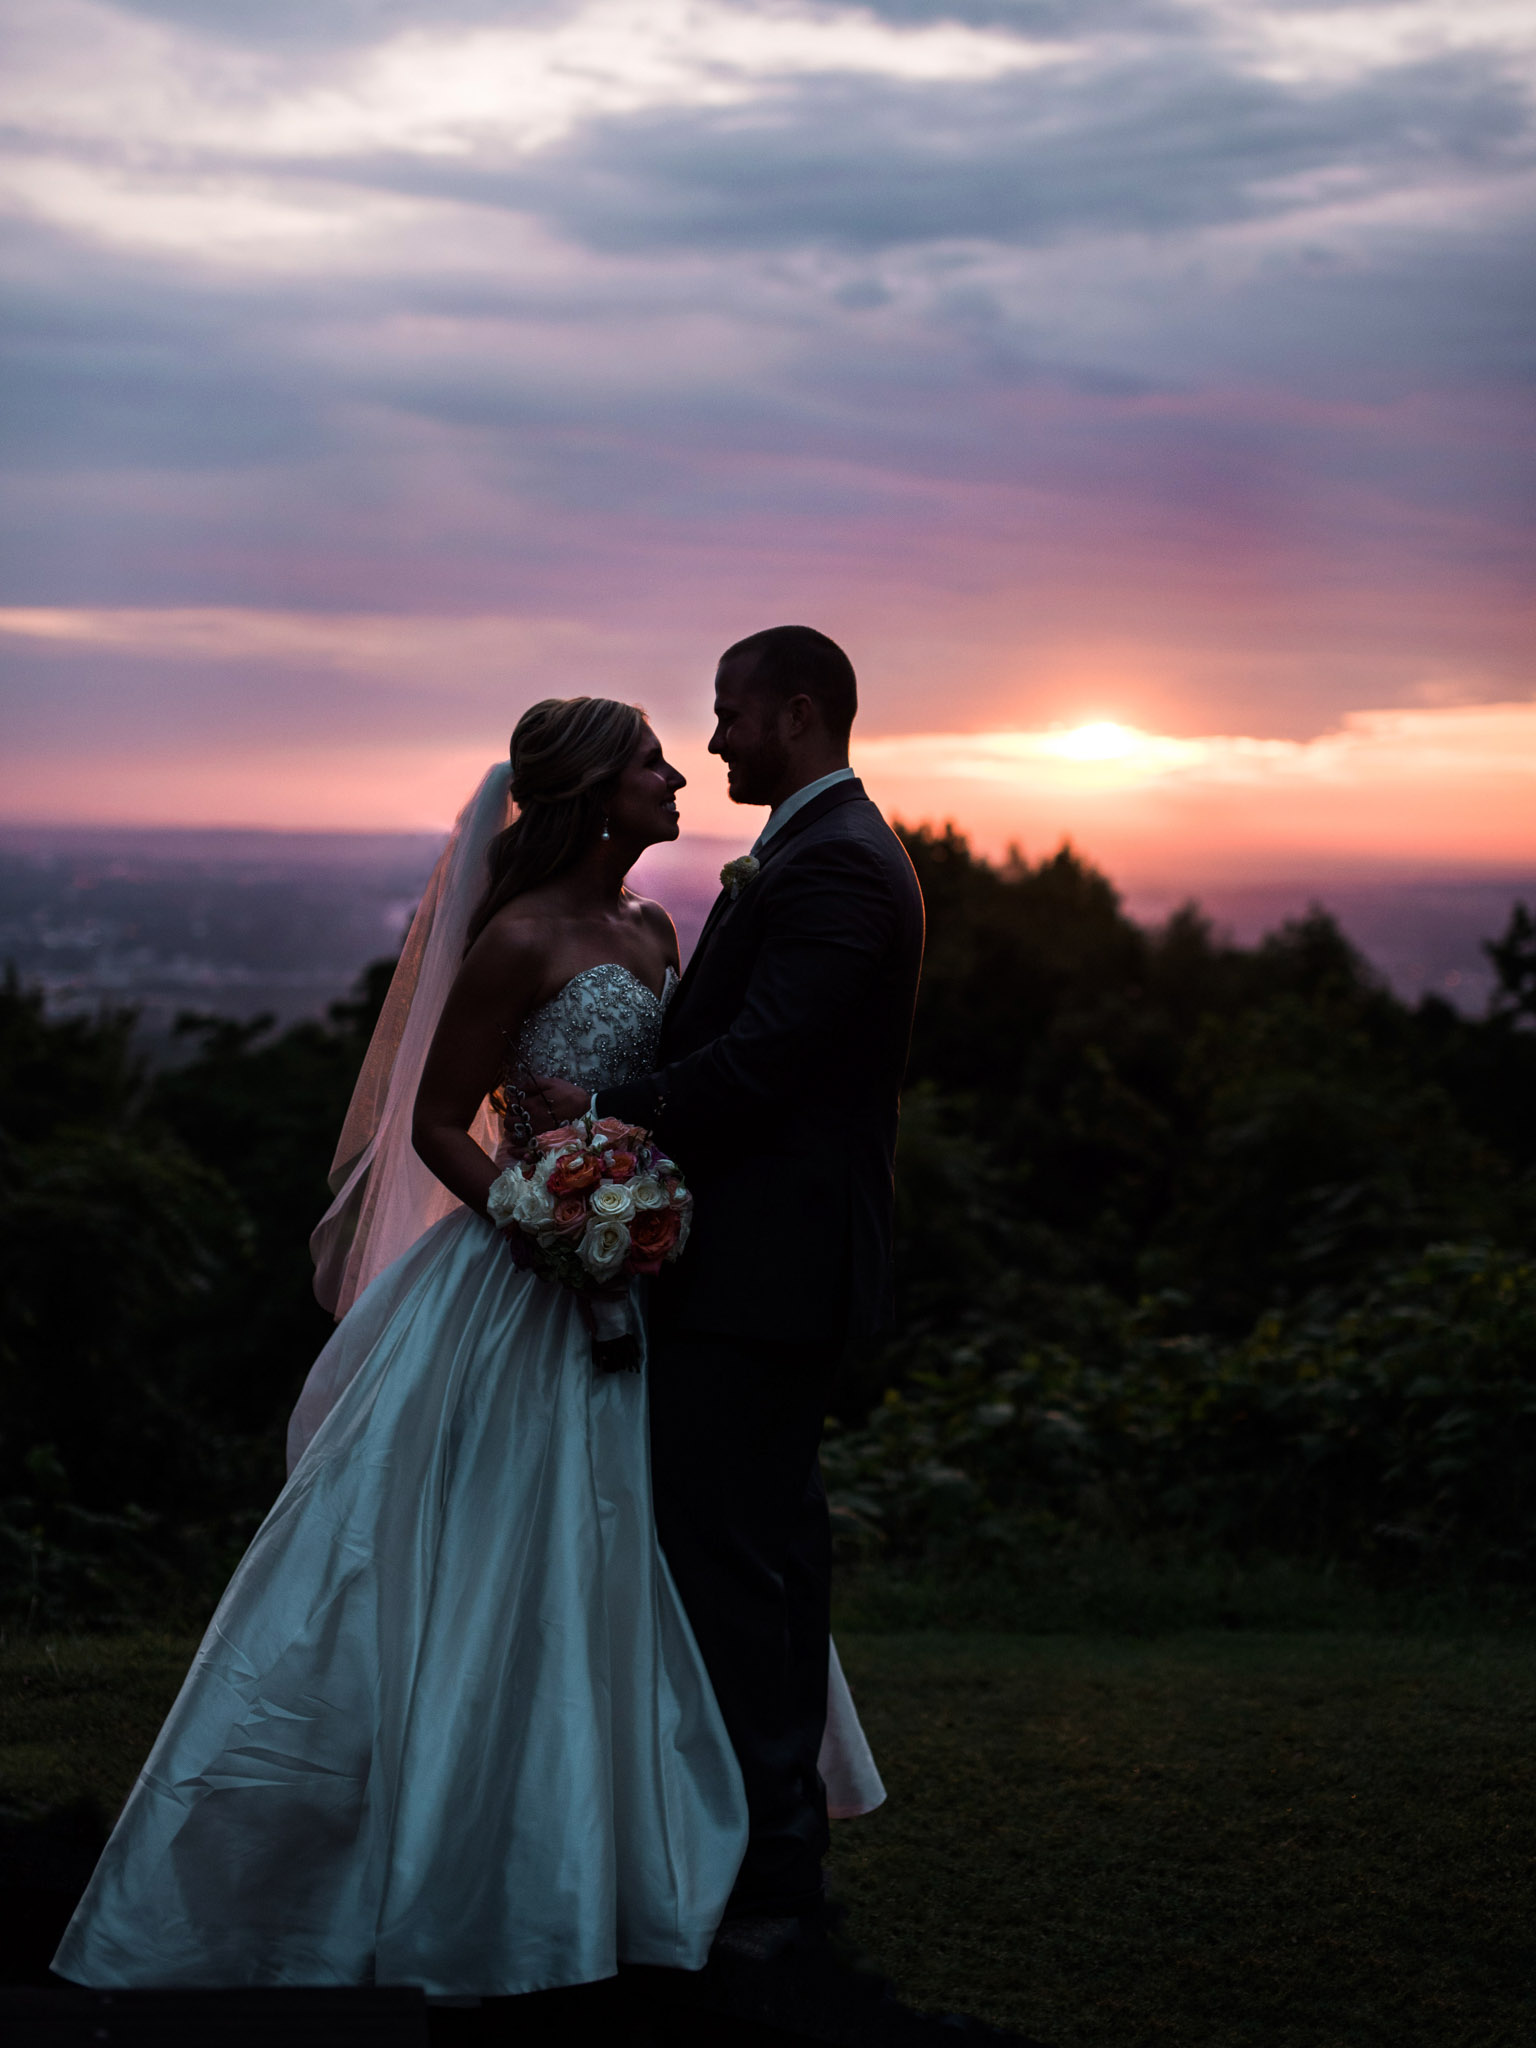 Bride and Groom silhouette in Alabama sunset on Burritt on the Mountain at Alabama wedding